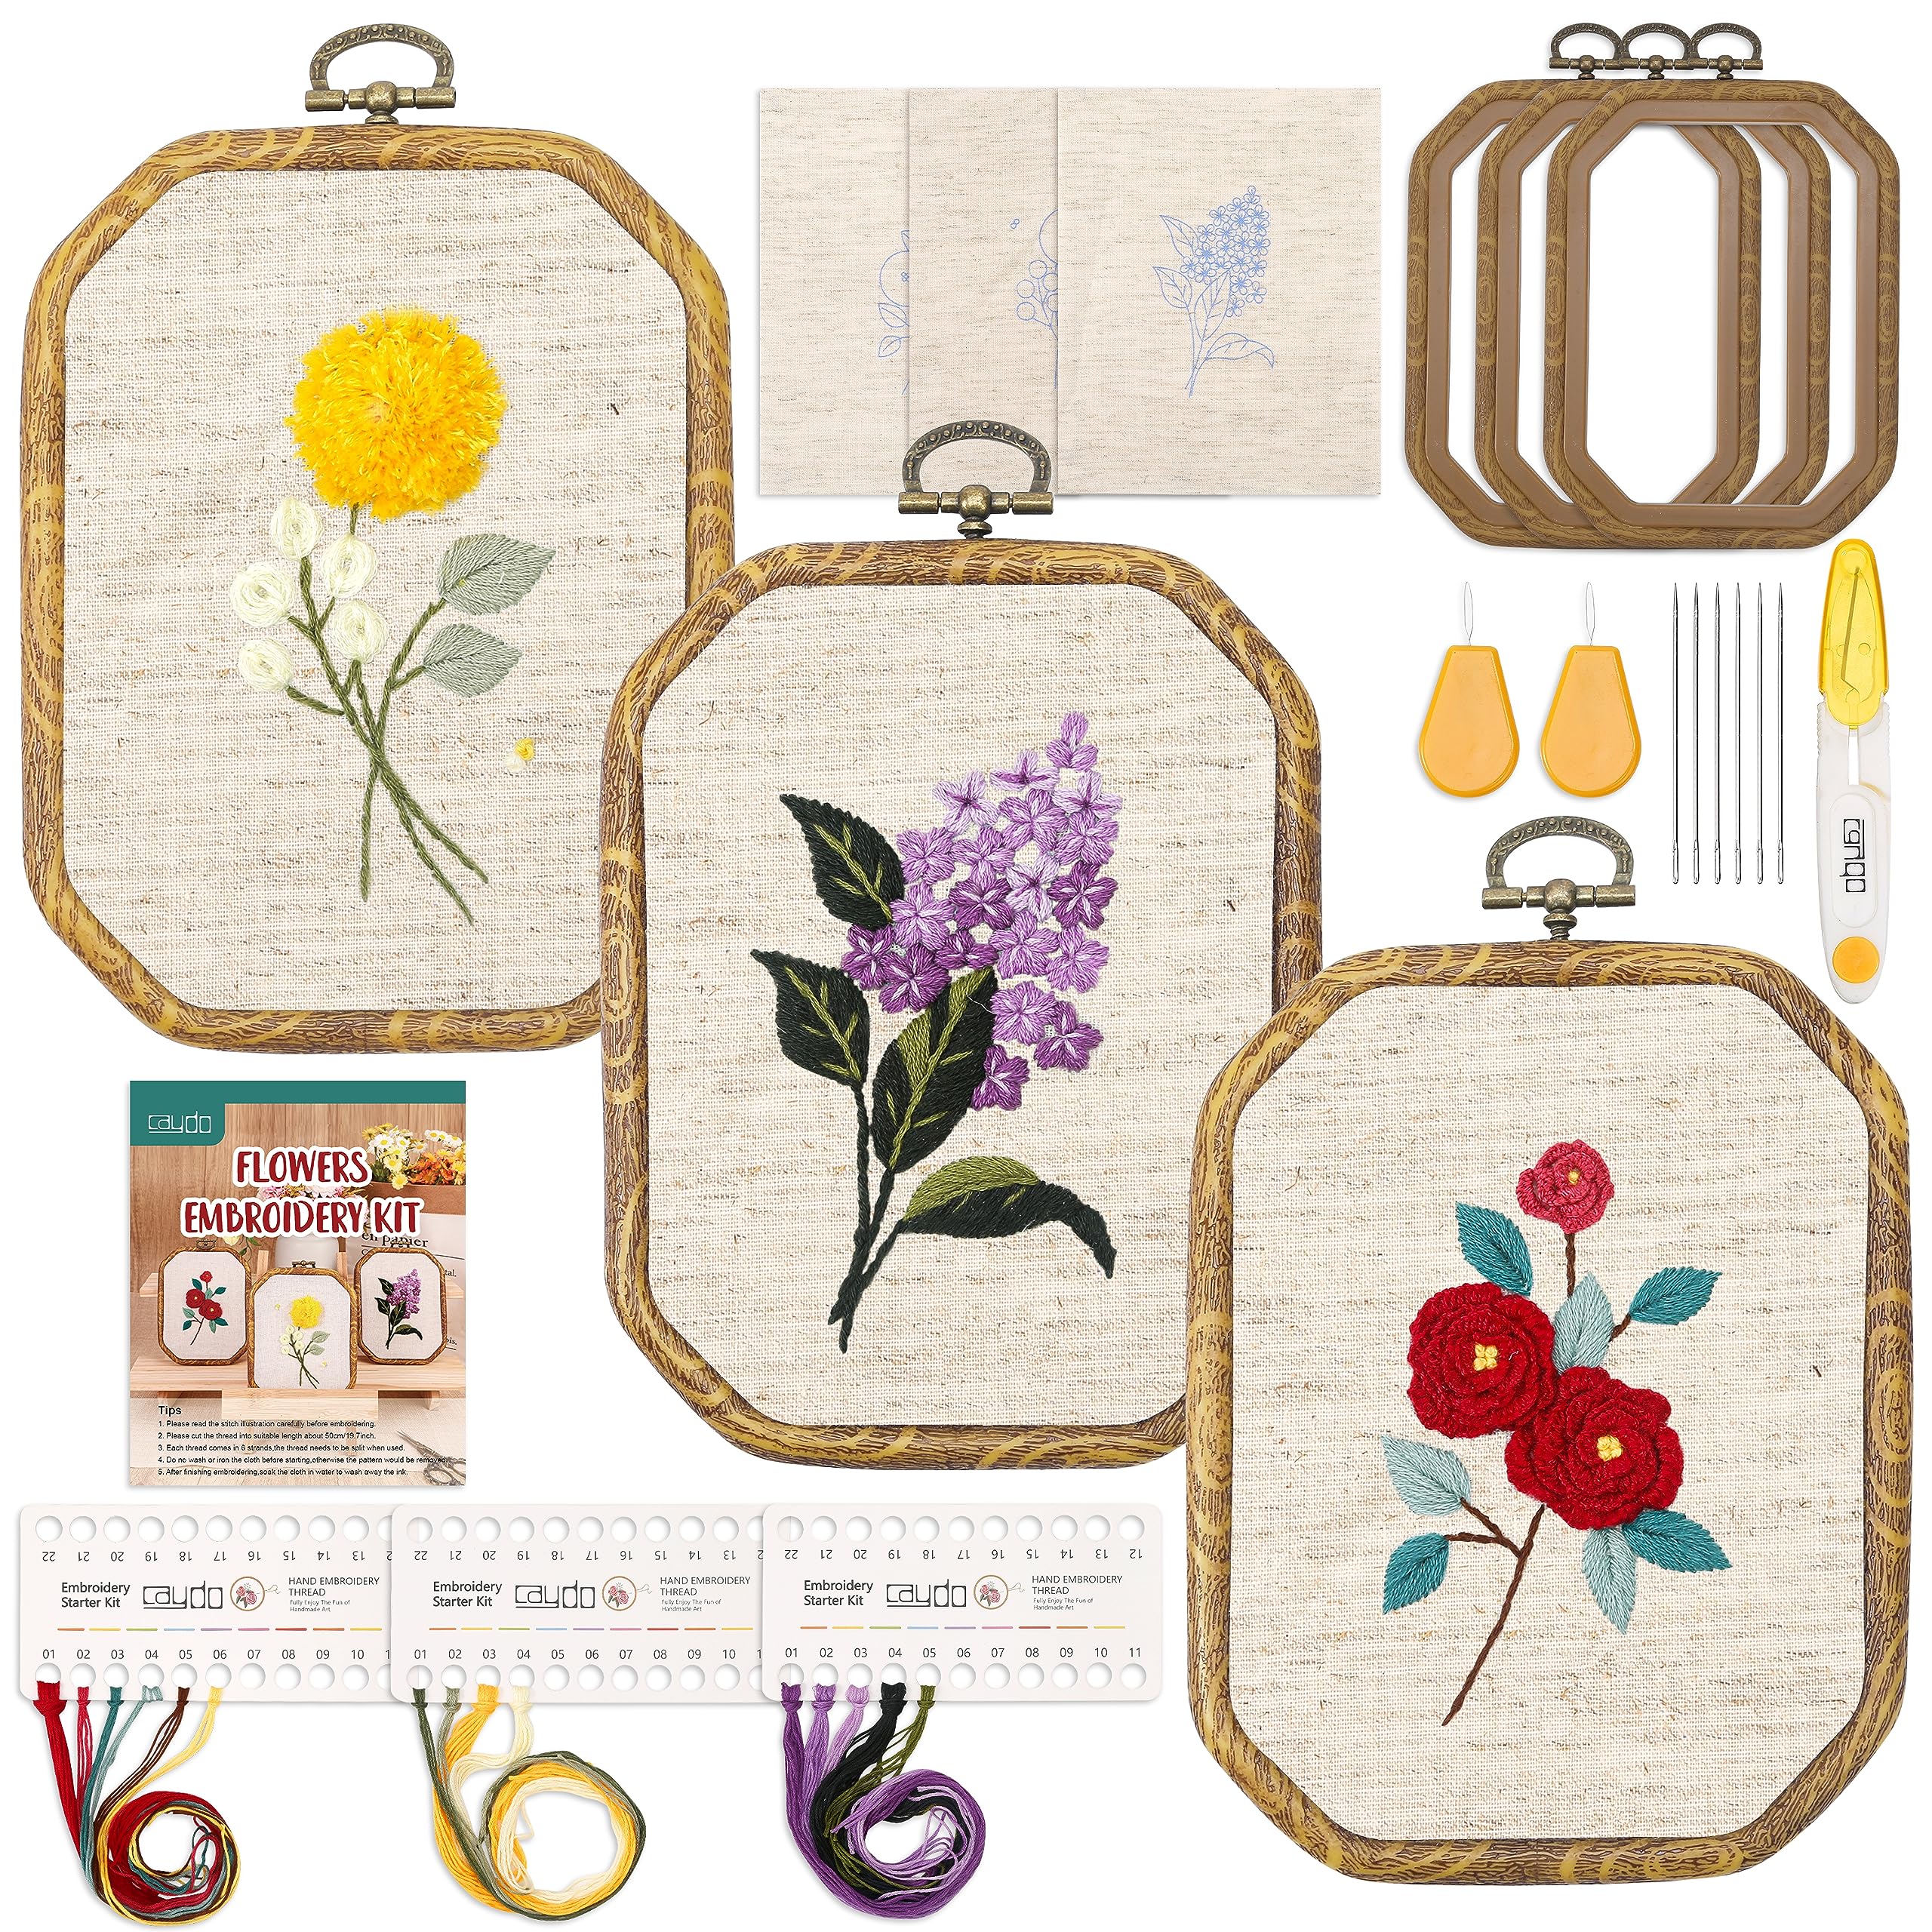  Caydo 3 Pack Embroidery Kit with Pattern, Cross Stitch